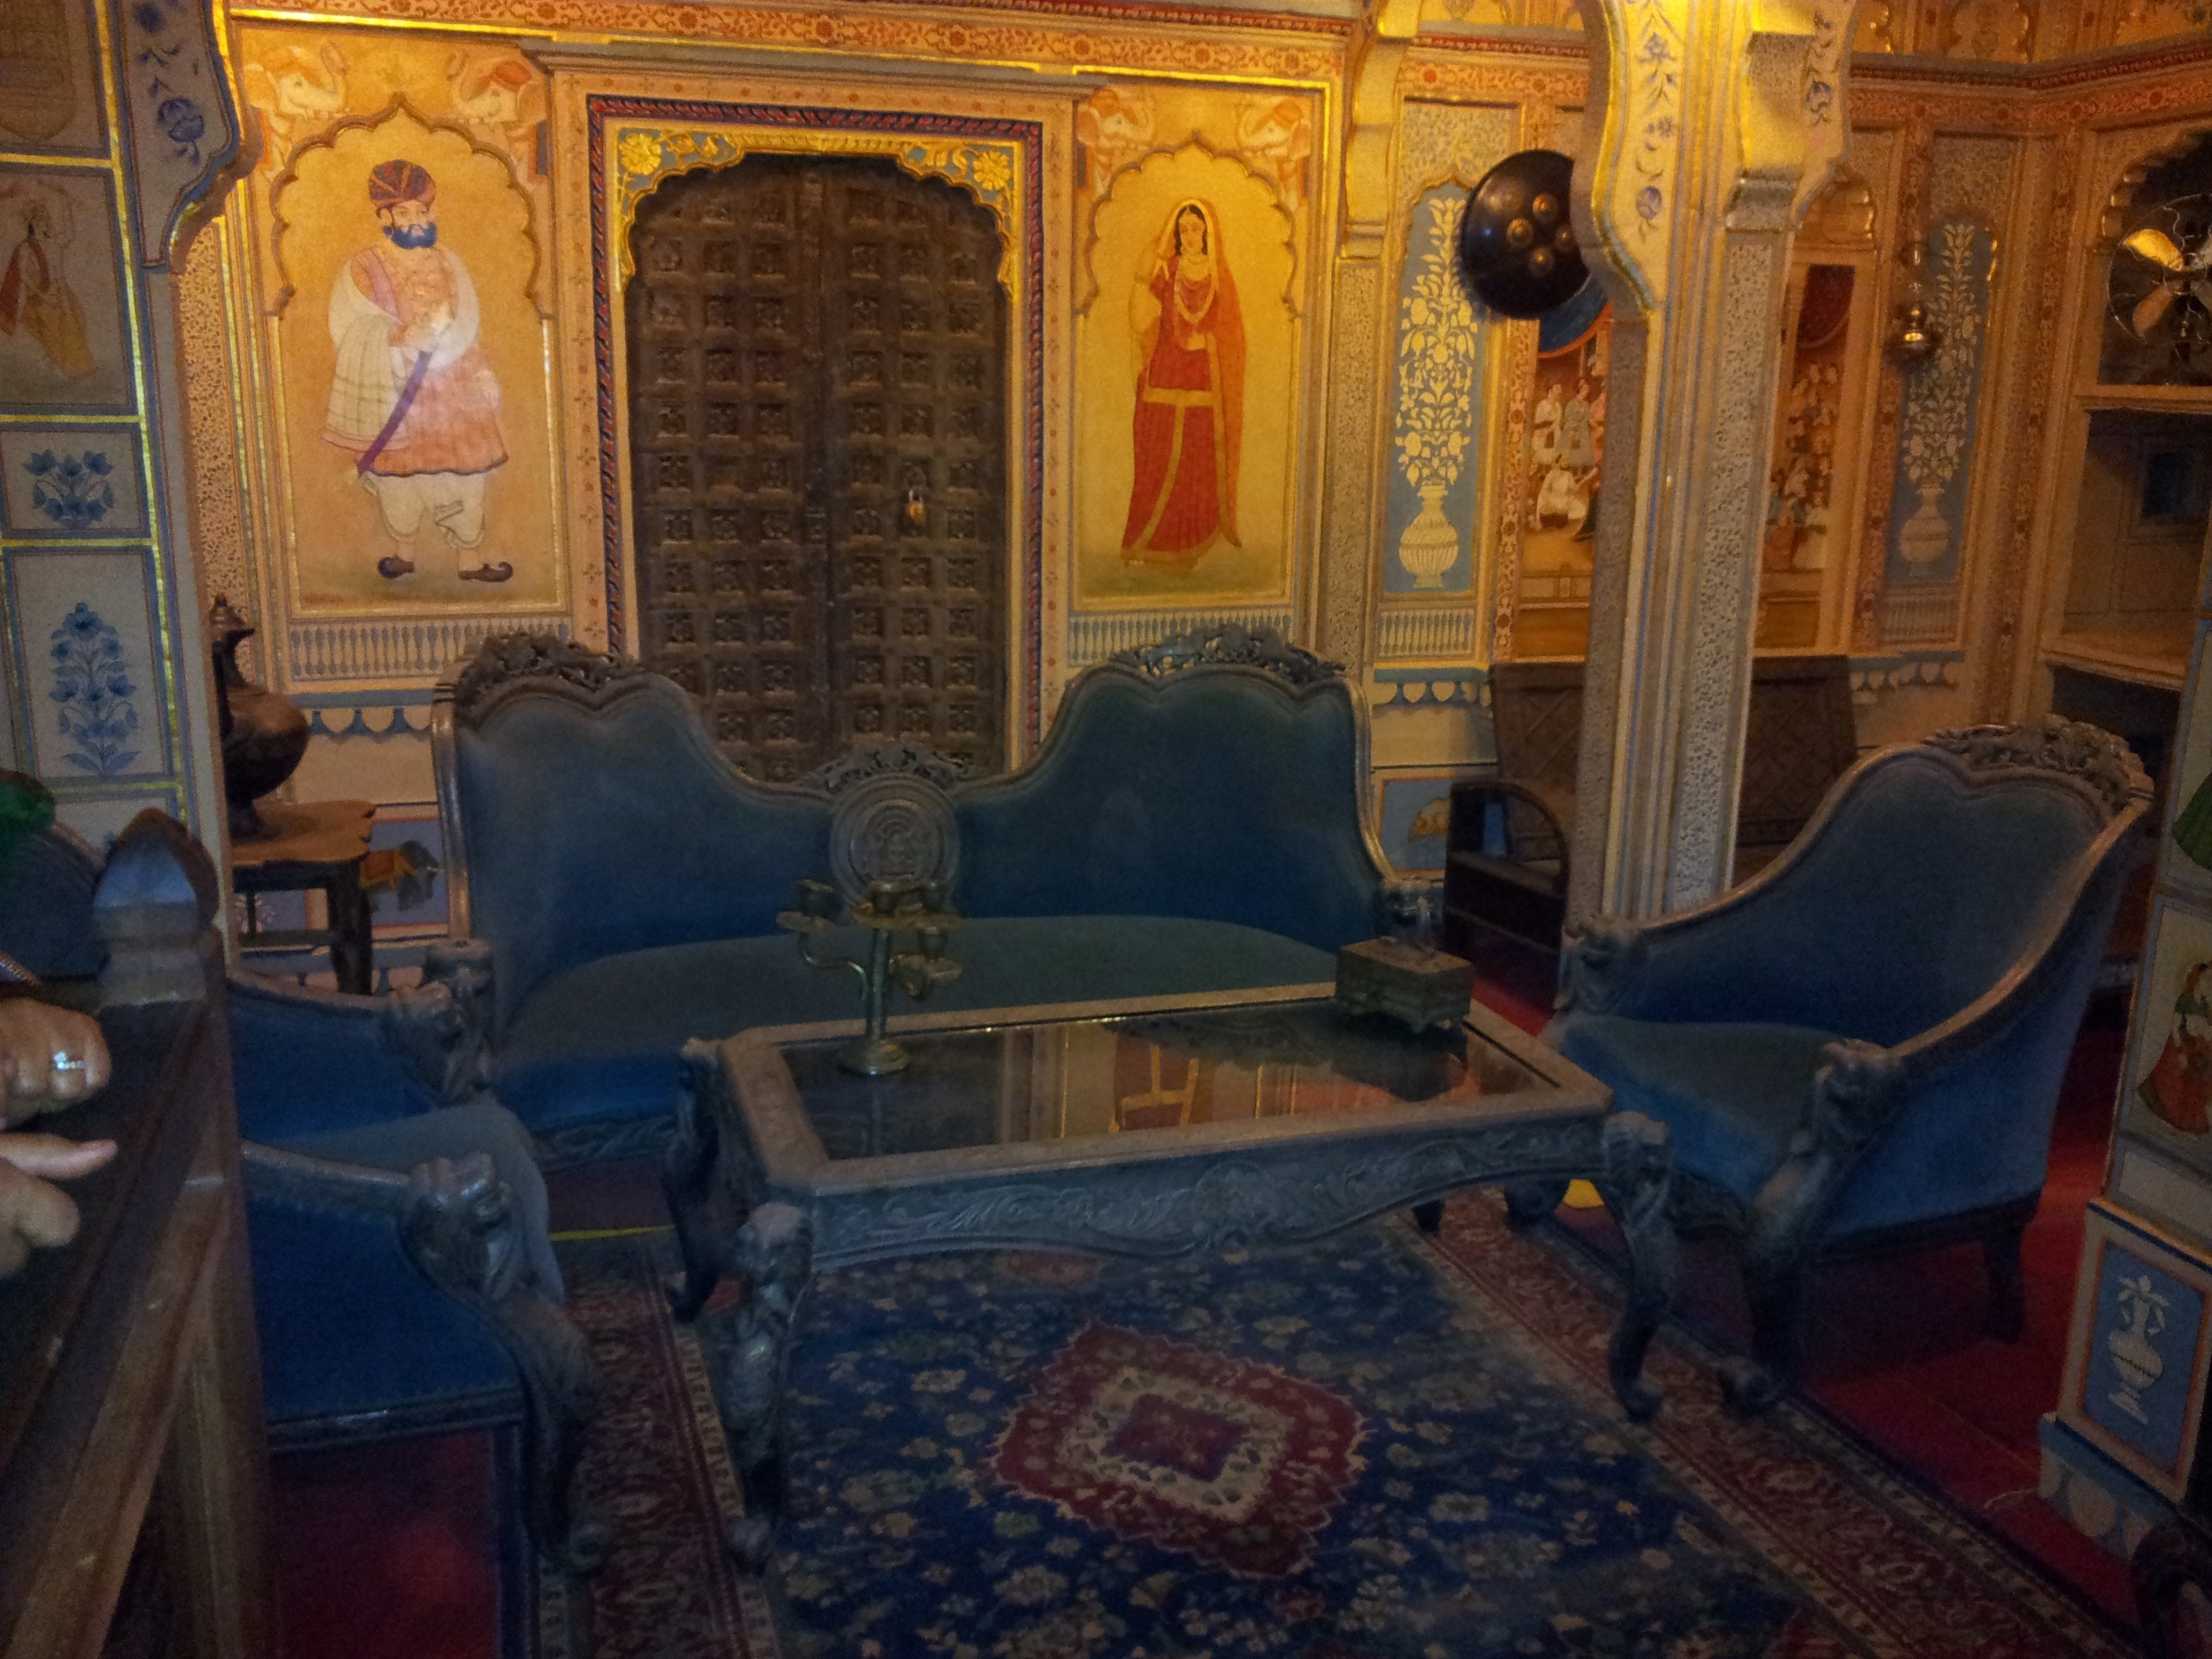 A cluster of 18th century havelis popular for intricate stone jaalis / carvings, mirror work and paintings. was build by Brocade and jewelry merchants.  The Haveli showcases private collection of textiles, handicrafts, cooking utensils etc from that era. 